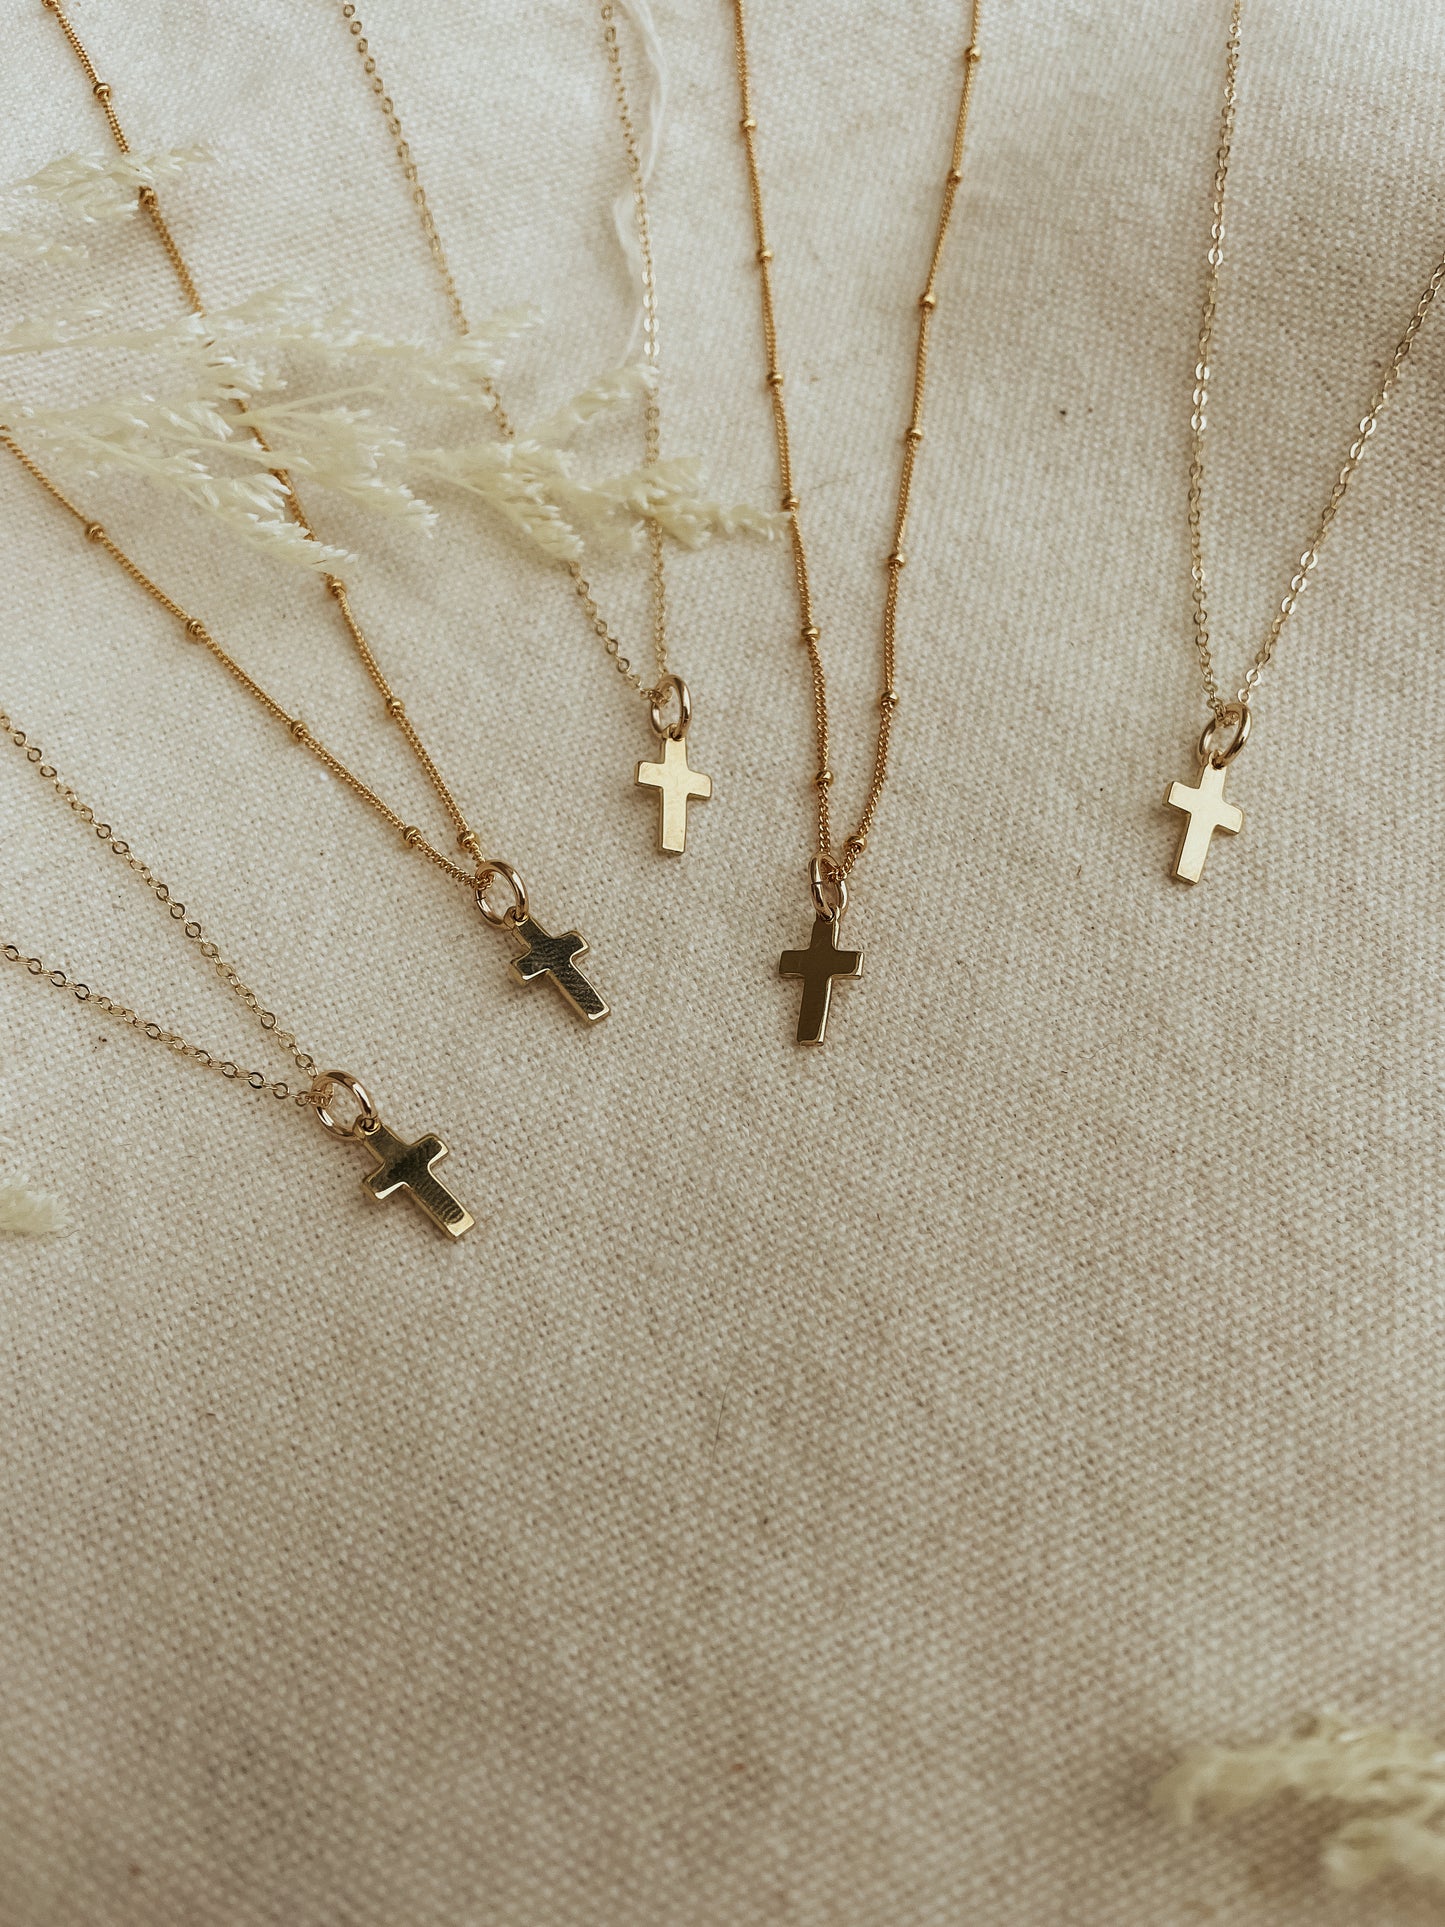 The Golden Cross Necklaces